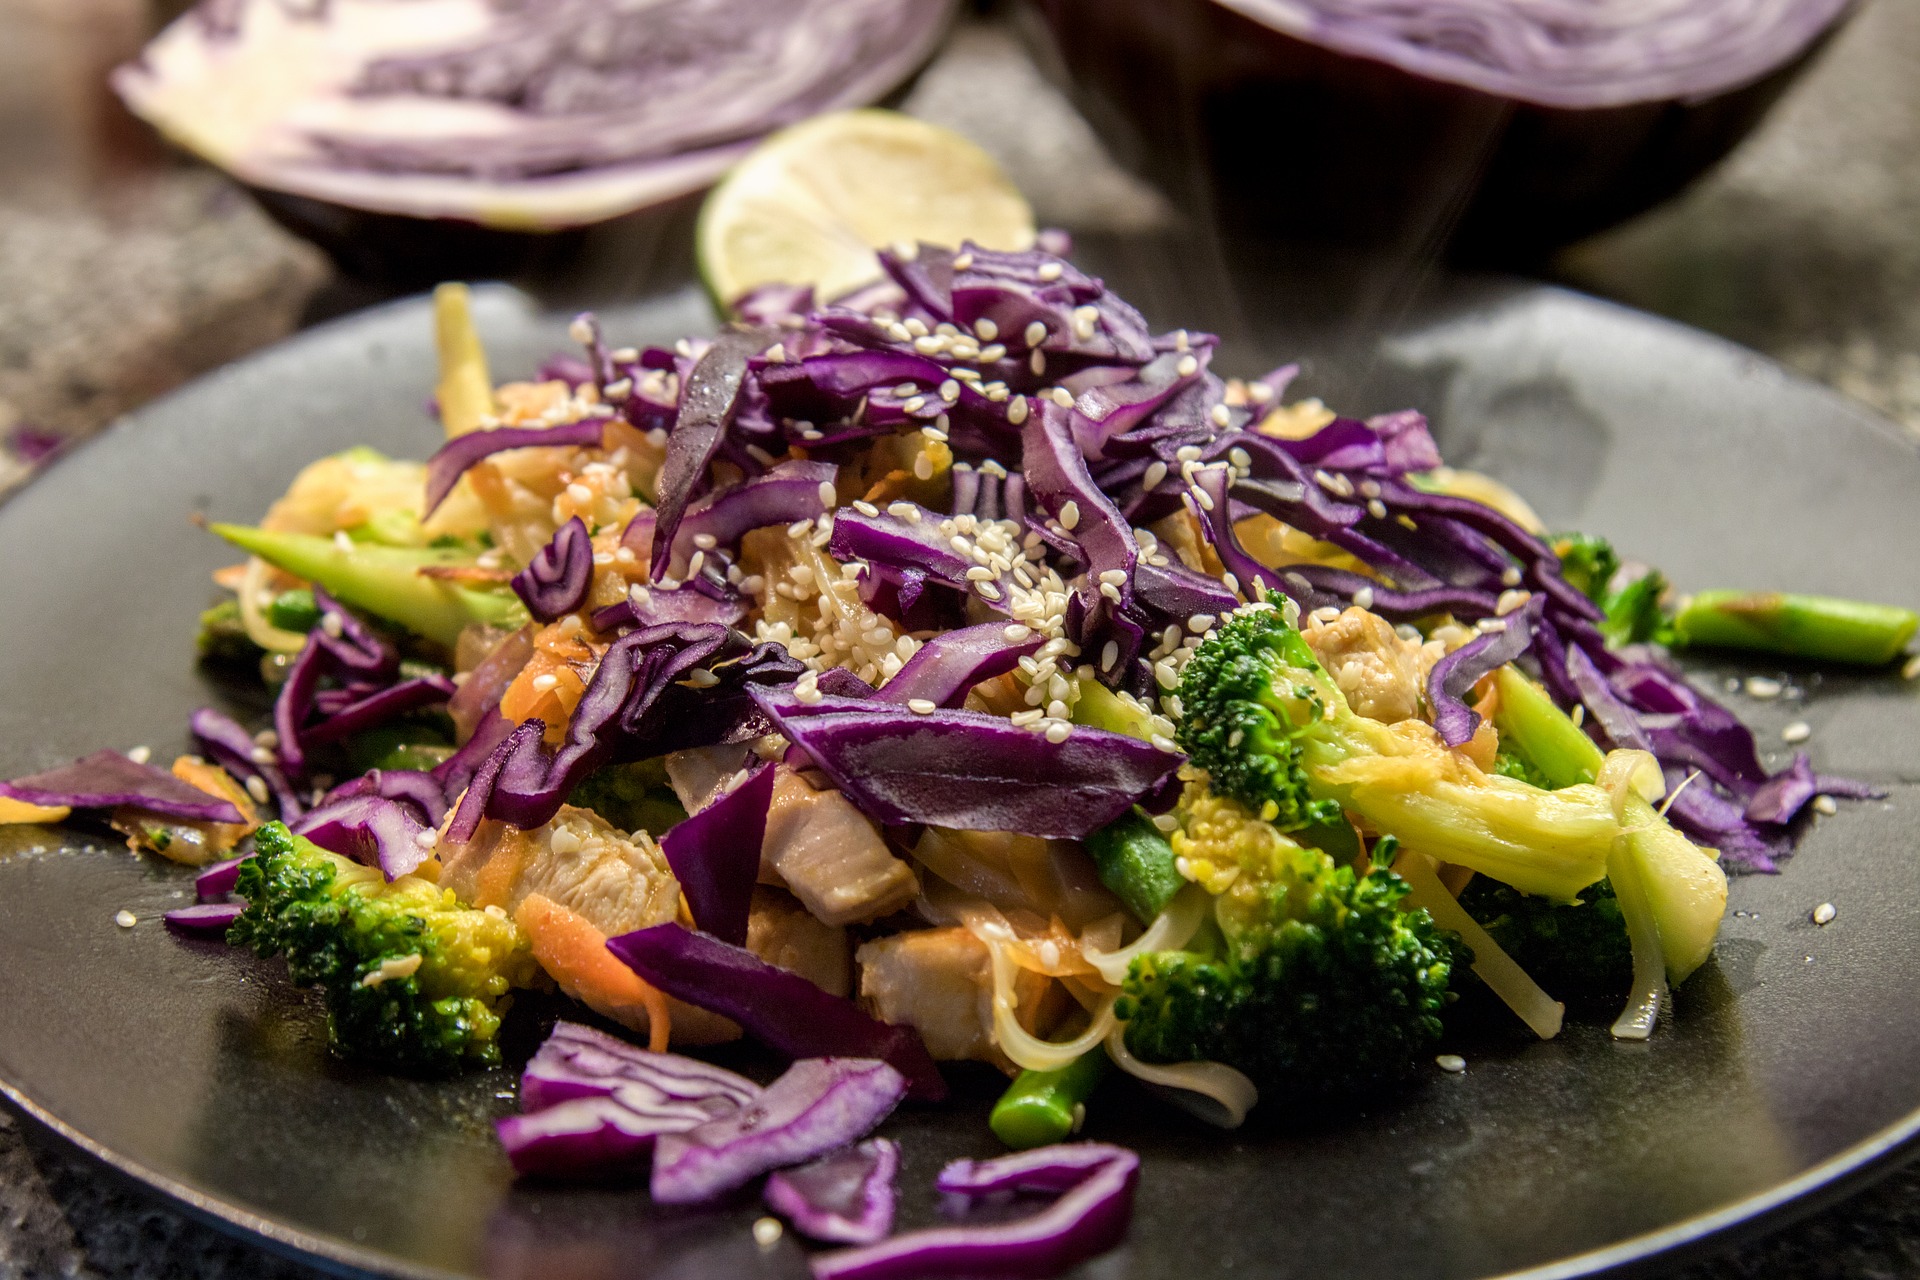 A stir-fry is a good way to use up whatever vegetables you have on hand. (Pixabay photo)